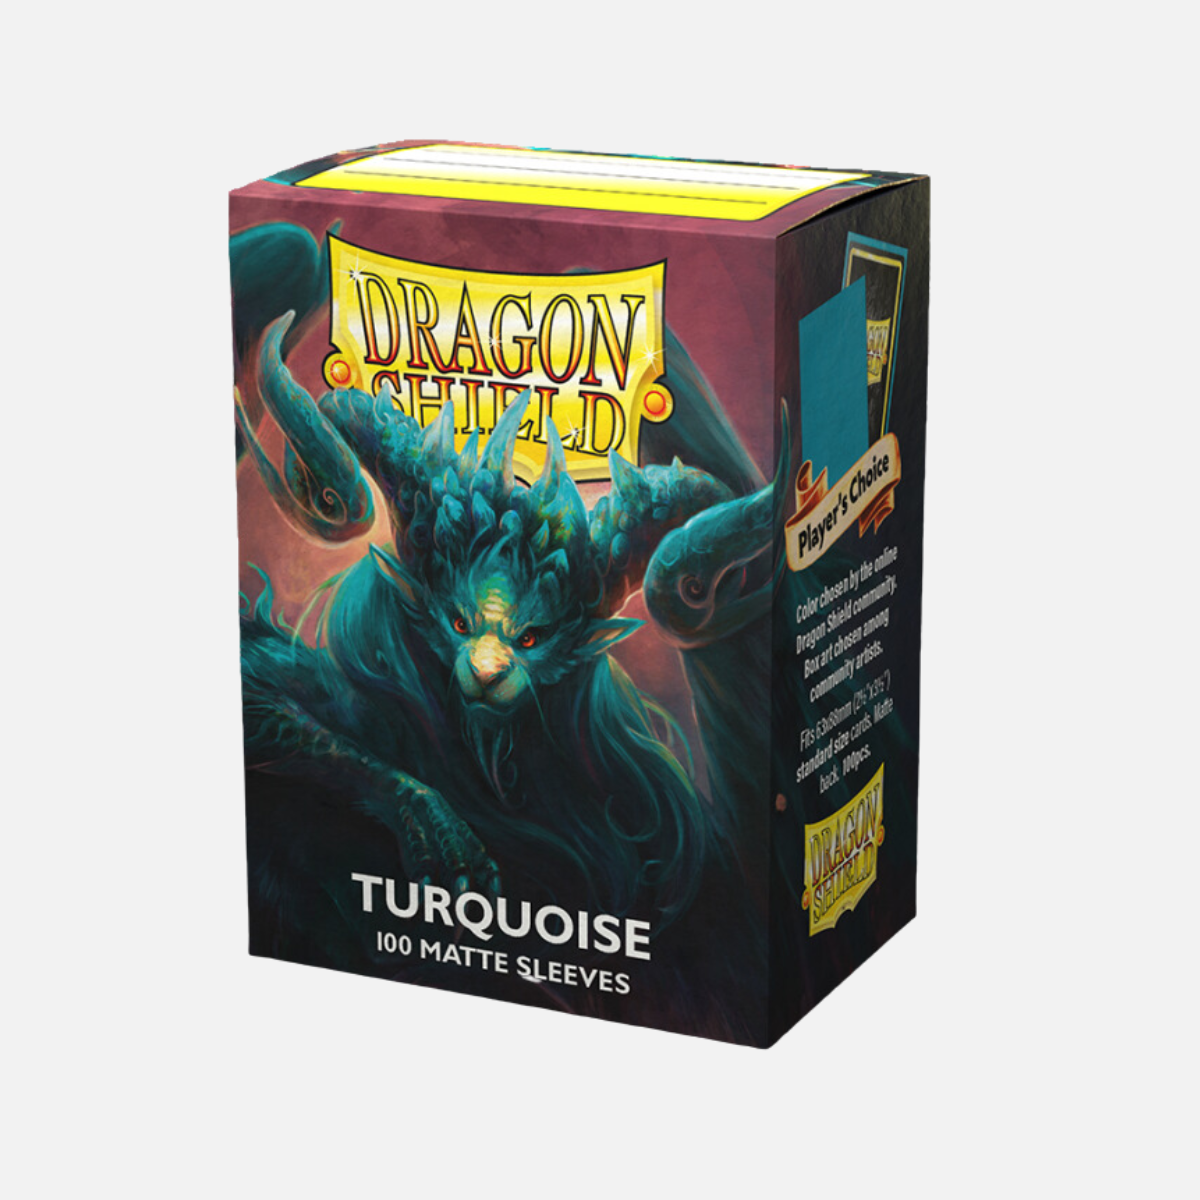 Dragon Shield card sleeves box of 100 turquoise matte